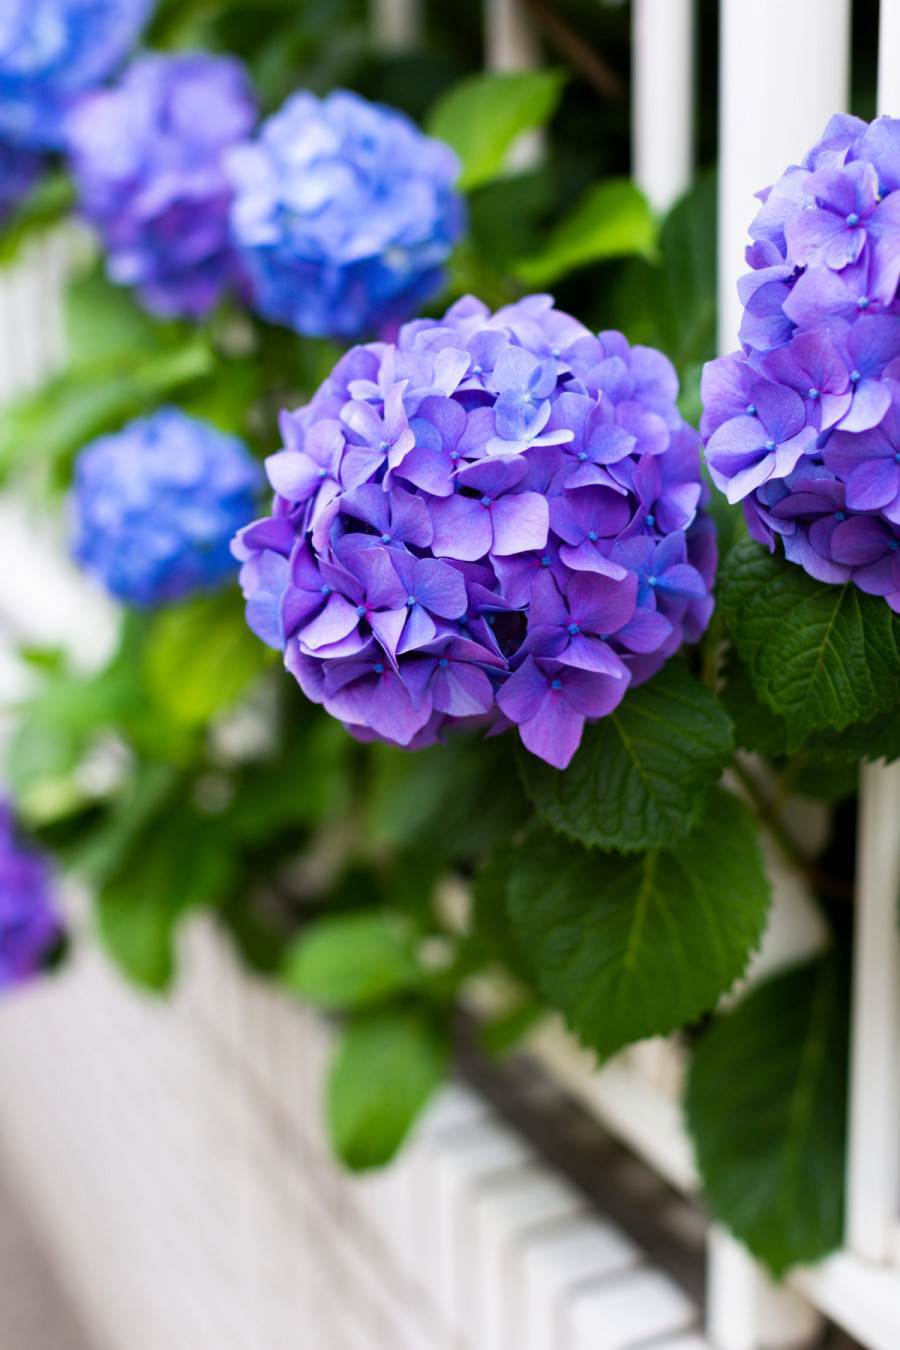 Planting Hydrangeas In Planters And In the Ground